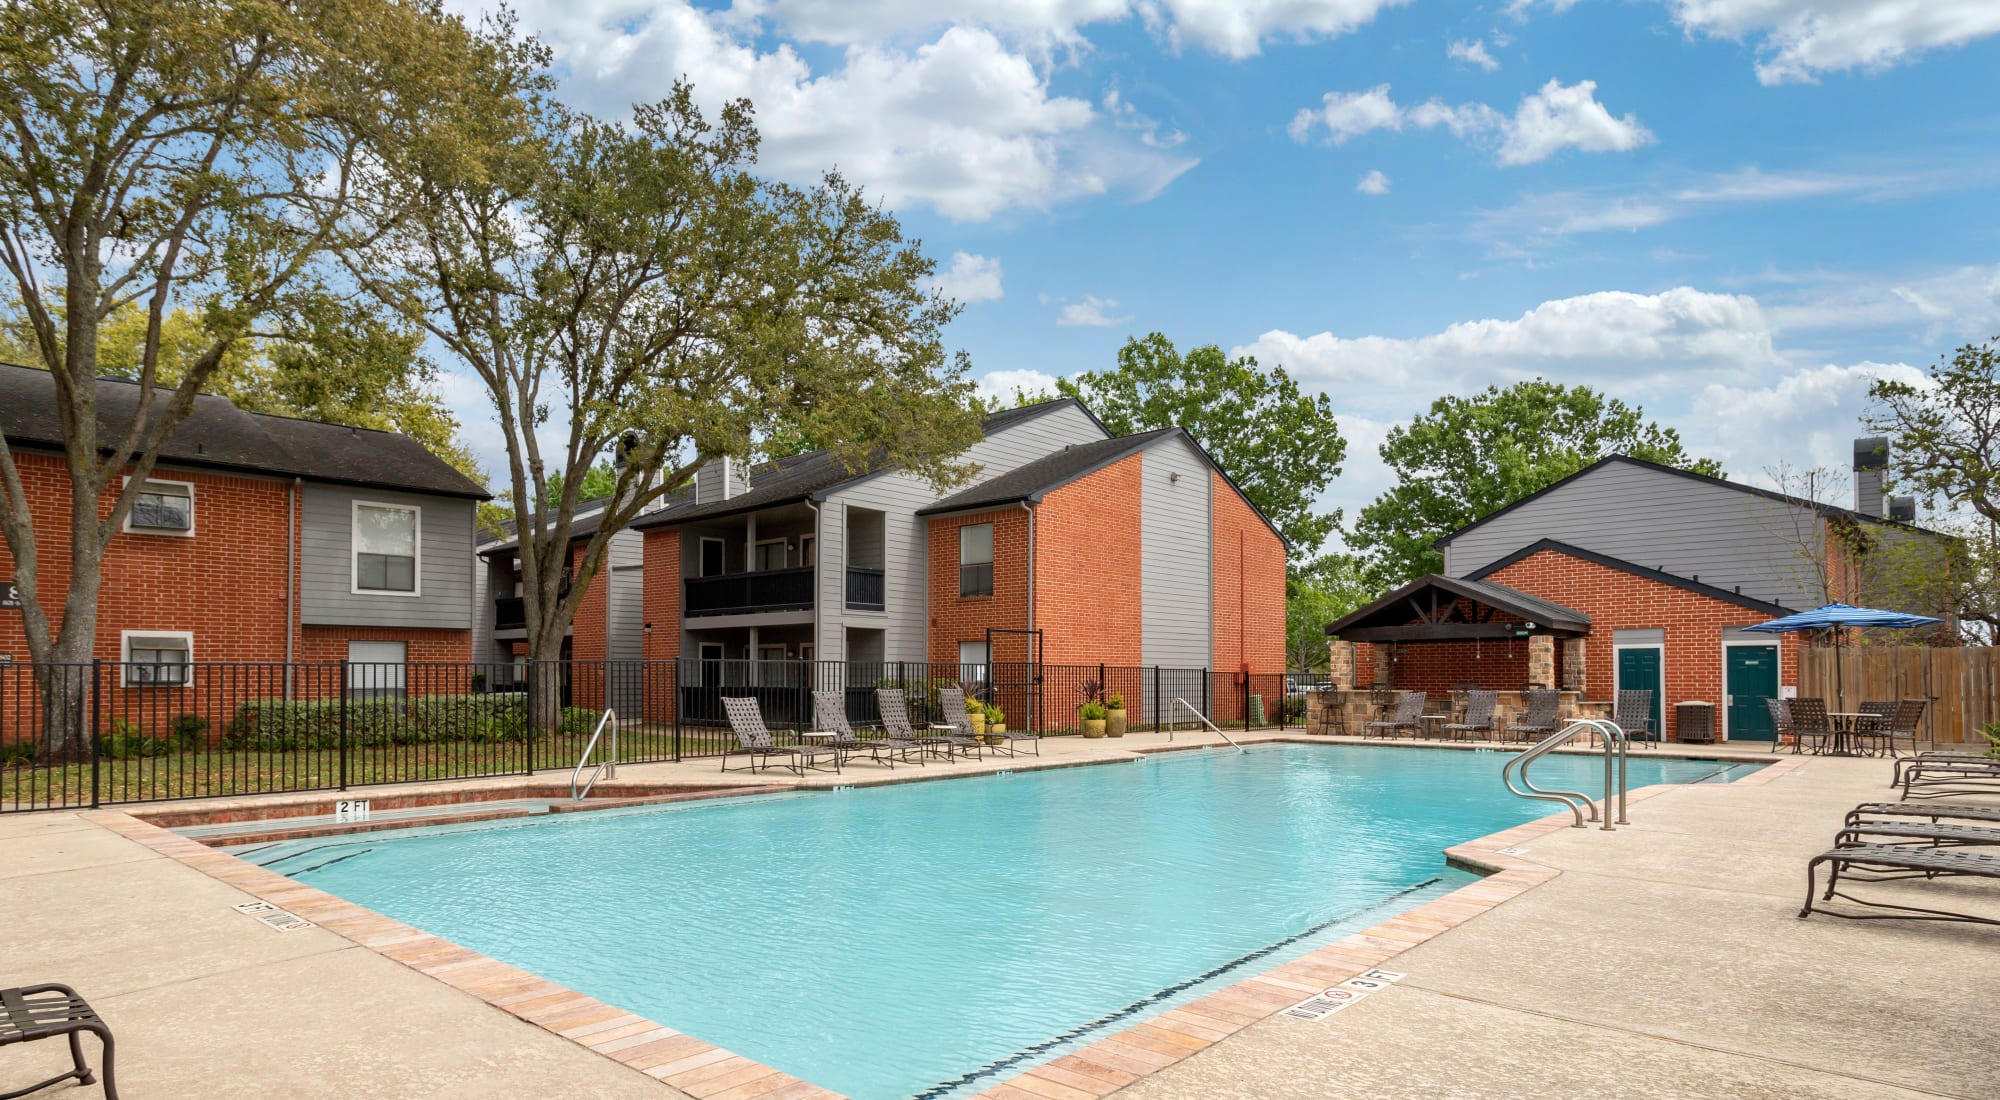 Amenities at Foundations at Austin Colony in Sugar Land, Texas